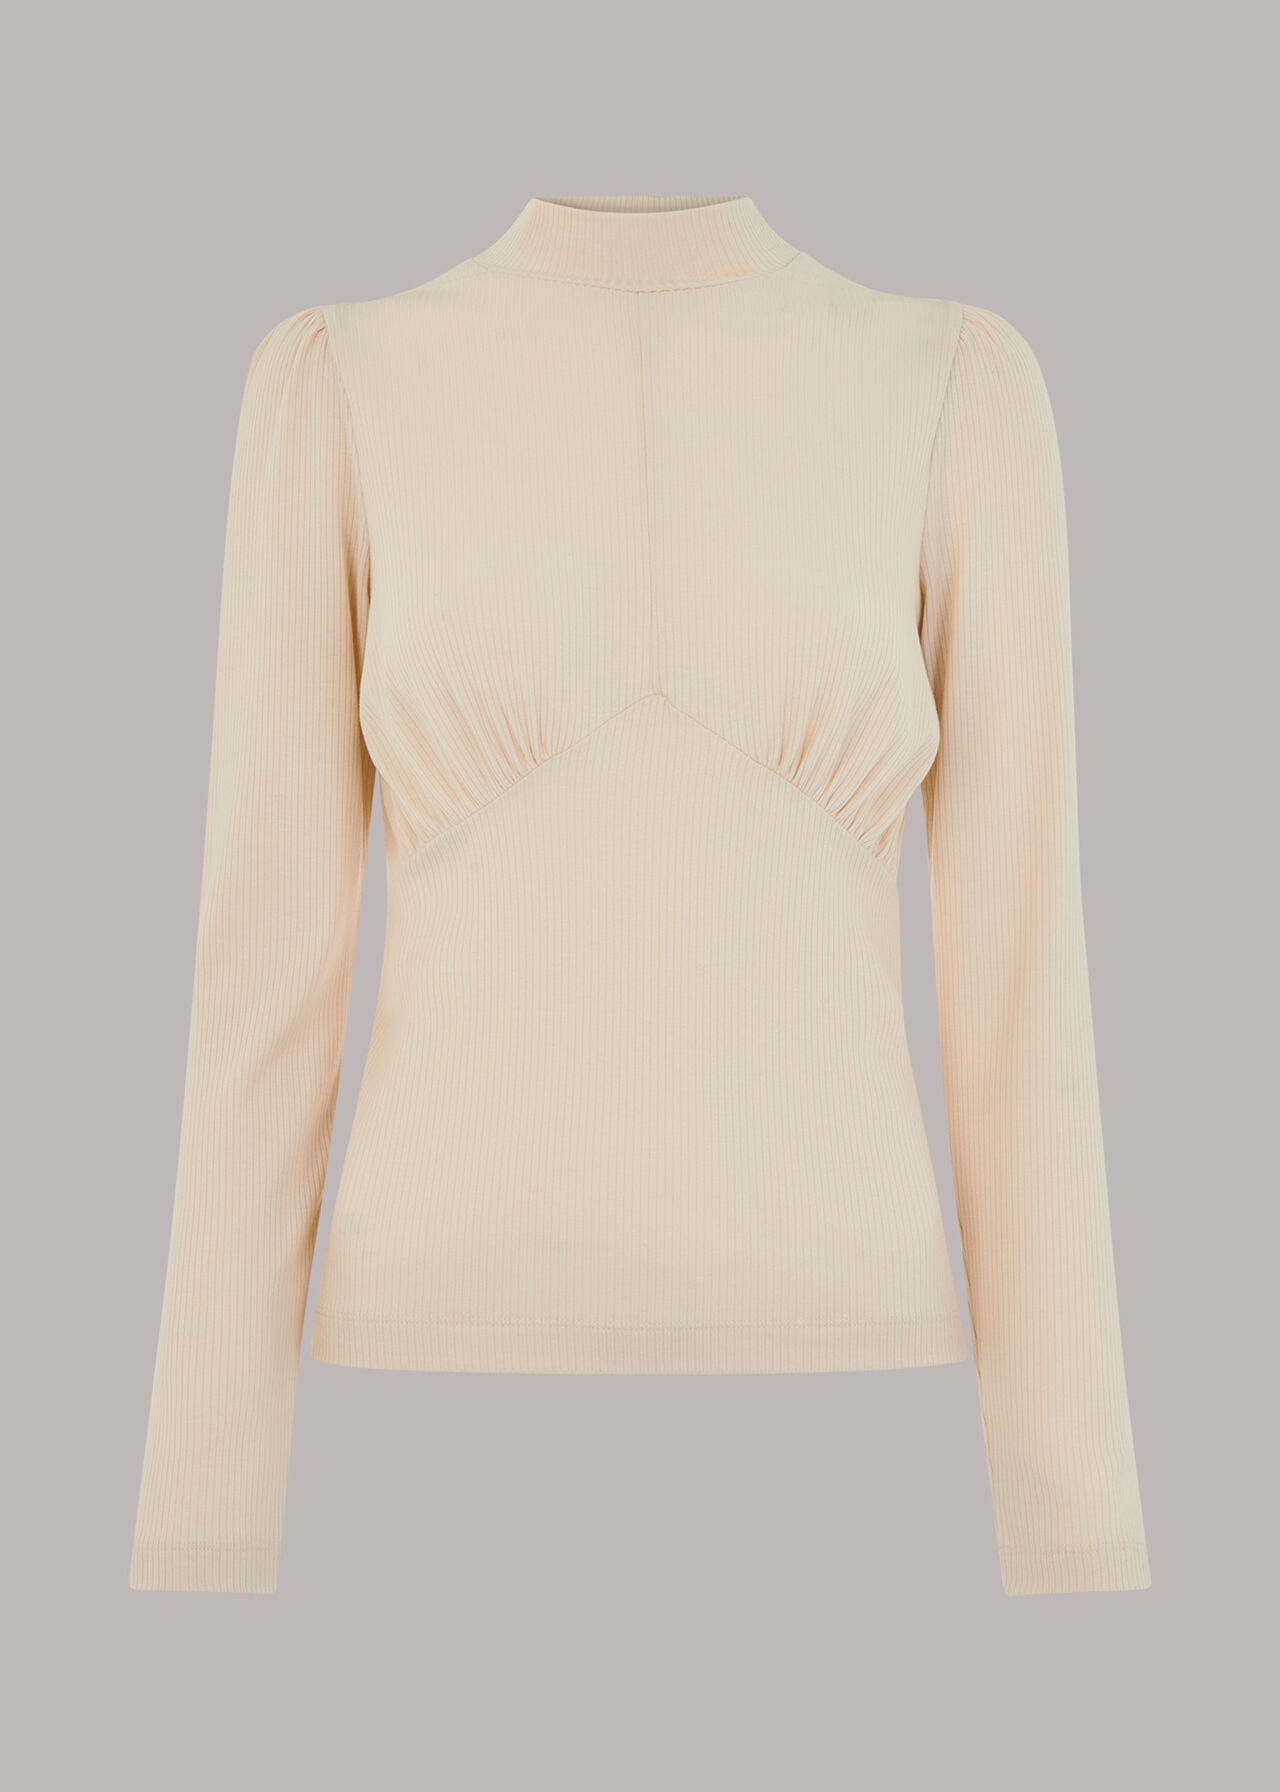 Oatmeal Gathered Bust Top | WHISTLES